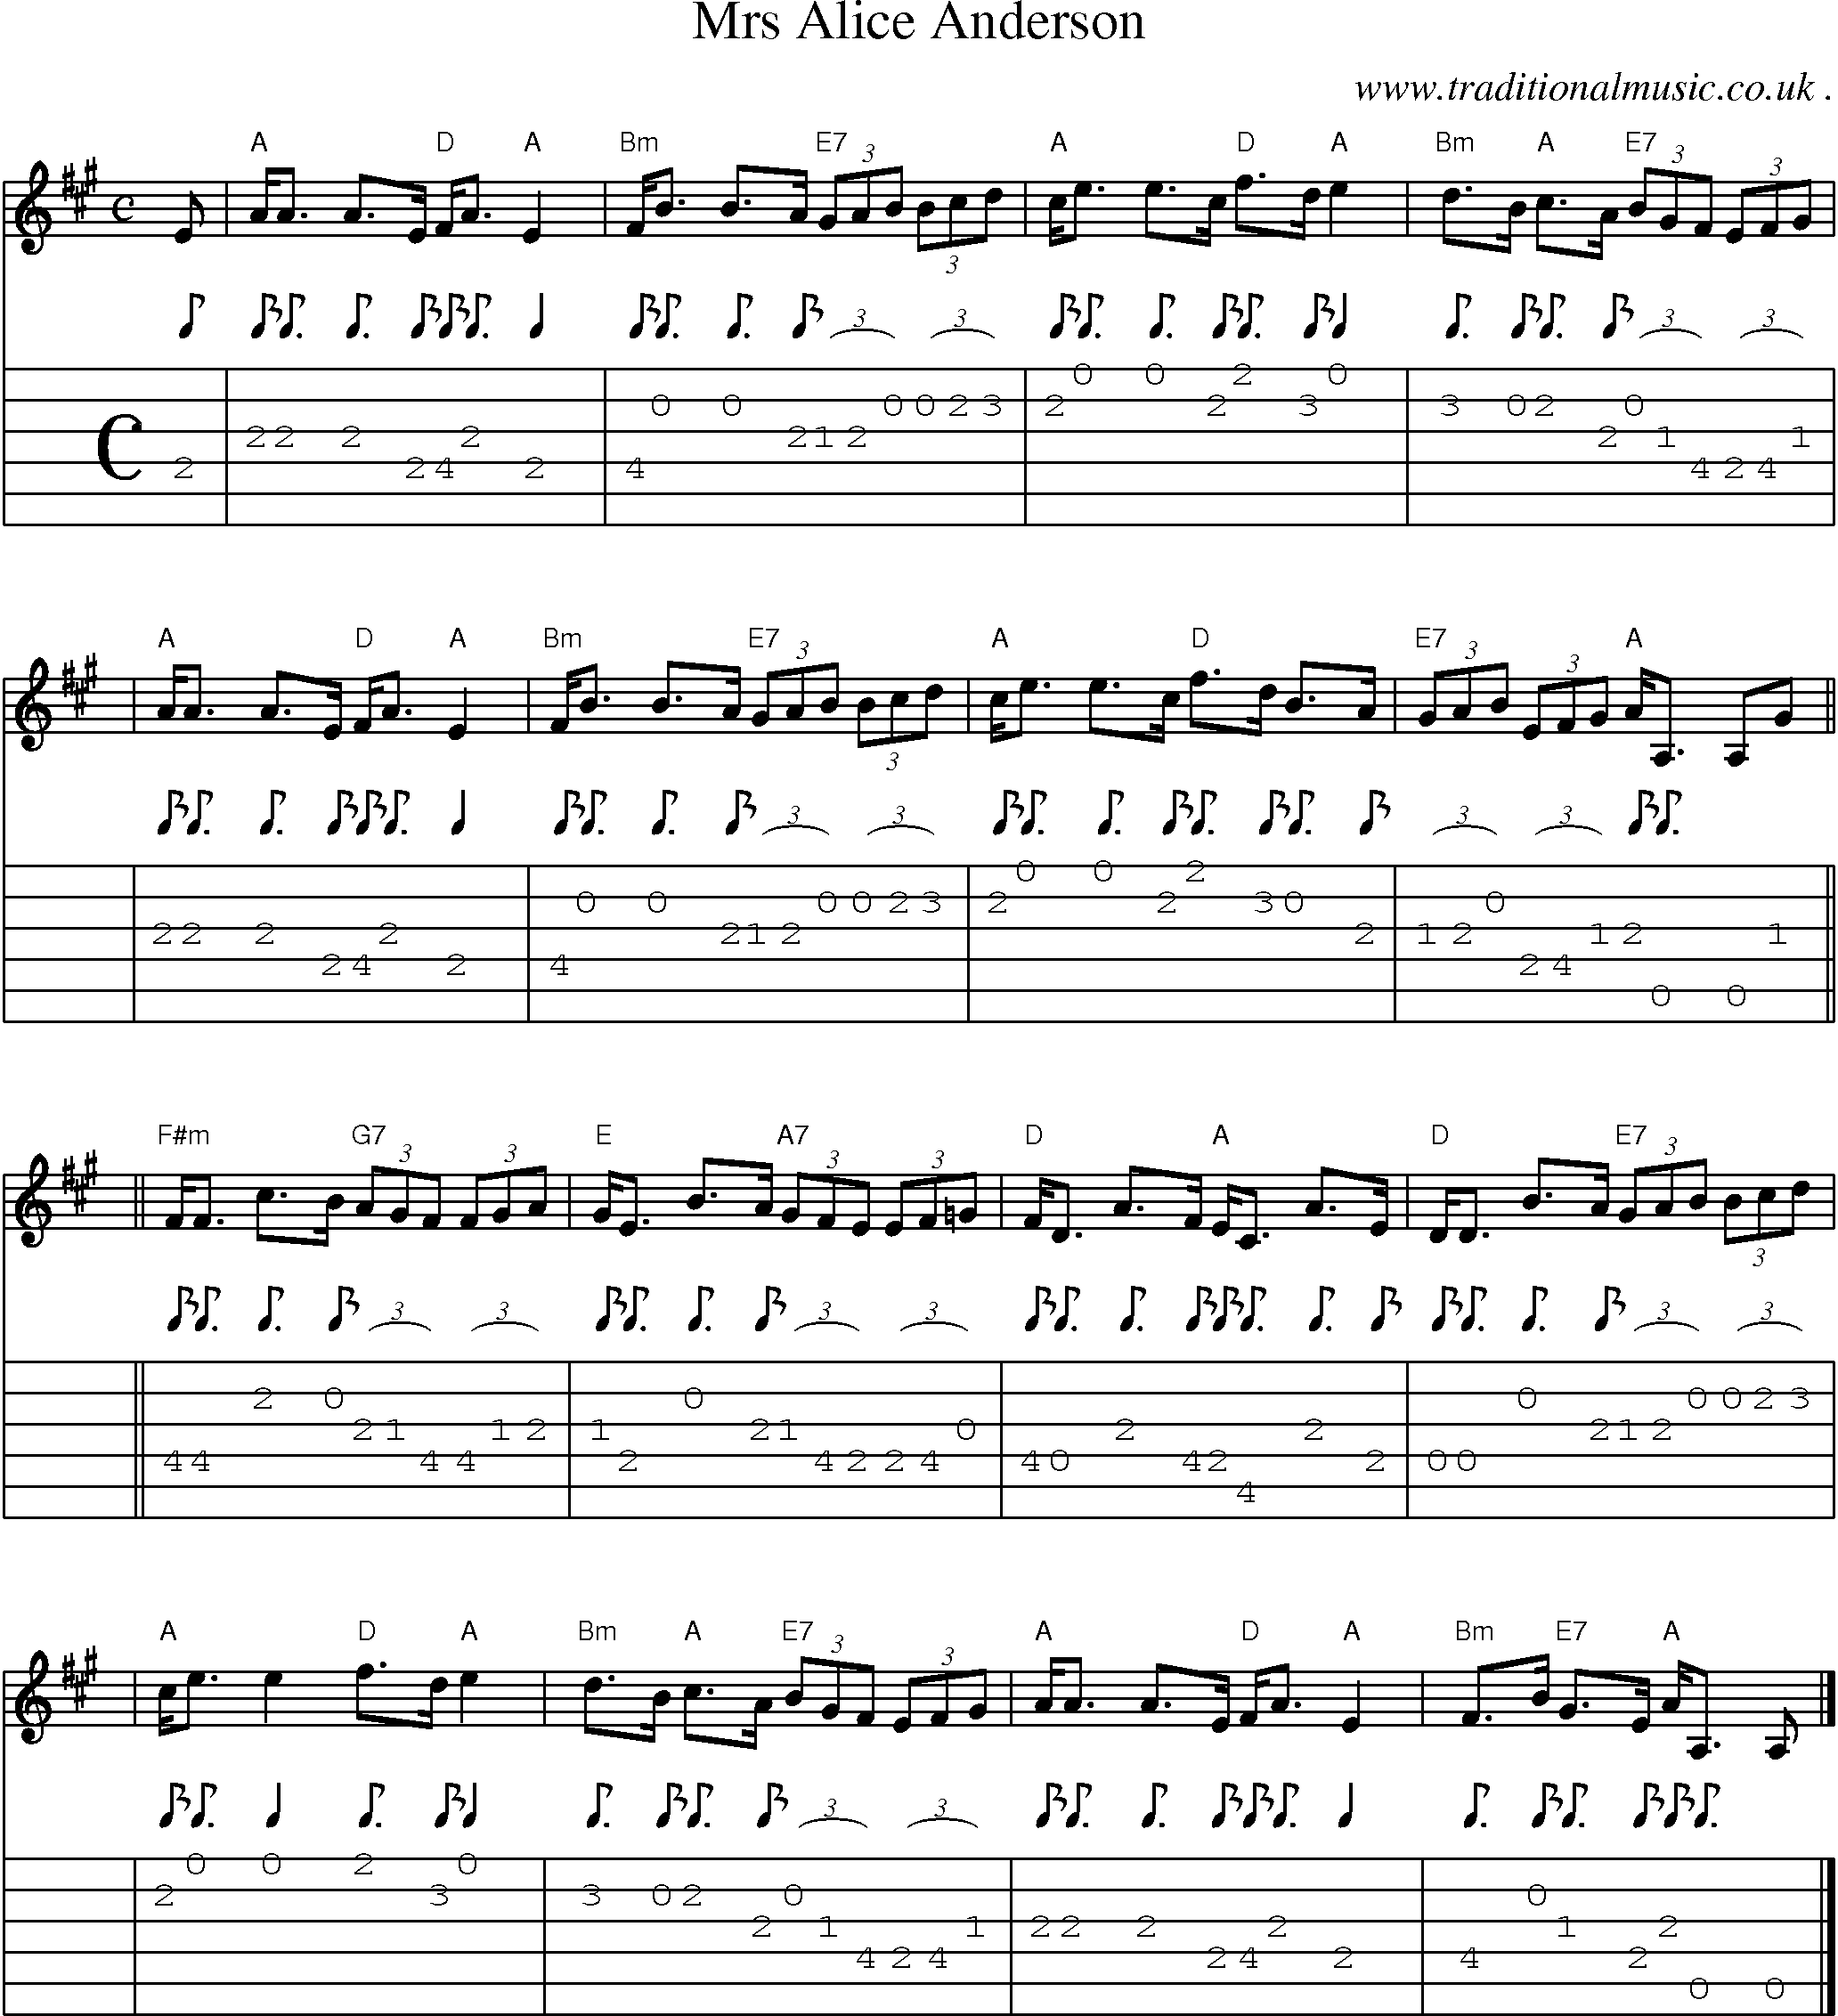 Sheet-music  score, Chords and Guitar Tabs for Mrs Alice Anderson